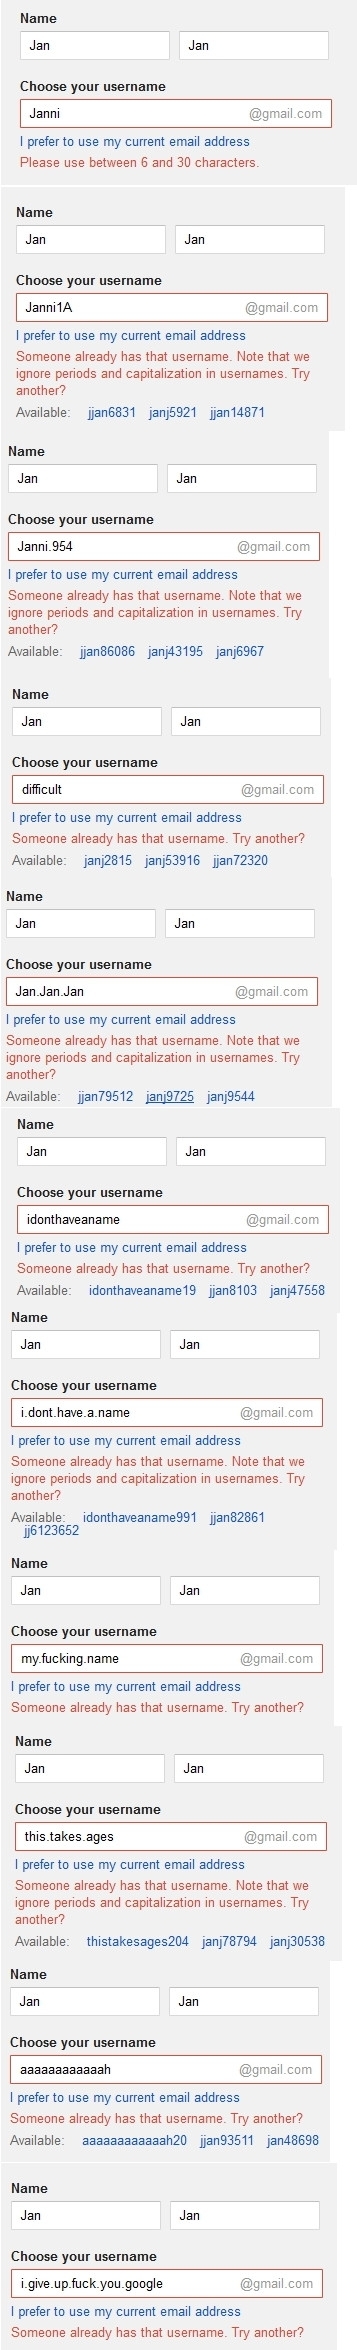 Friend tried to register for his very first gmail account today